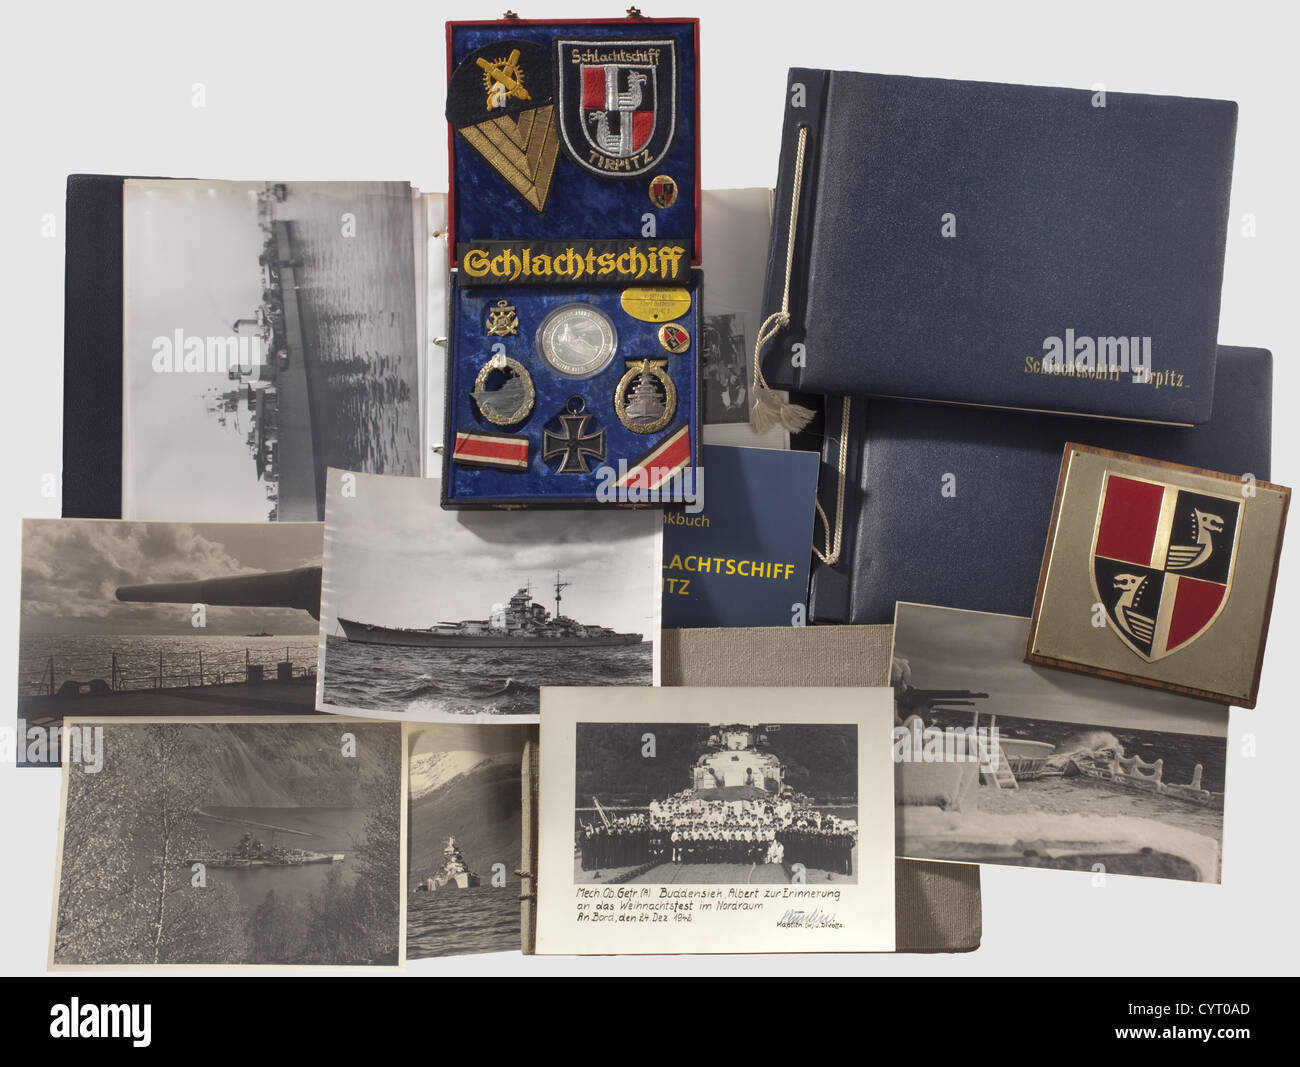 Battleship Tirpitz,orders,certificate and photo albums Comprehensive legacy from the property of a crew member of the 'TIRPITZ',Maschinen-Obergefreiter(engineer PFC)(Artillery)Albert Buddensiek. Including the orders: Fleet War Badge in nonferrous metal with maker's ID 'Fec. Adolf Bock Ausf. Schwerin Berlin',incl. award certificate issued on 11 Sept. 1943 with the original signature of Admiral Kummetz historic,historical,1930s,20th century,navy,naval forces,military,militaria,branch of service,branches of service,armed forces,armed service,obj,Additional-Rights-Clearences-Not Available Stock Photo